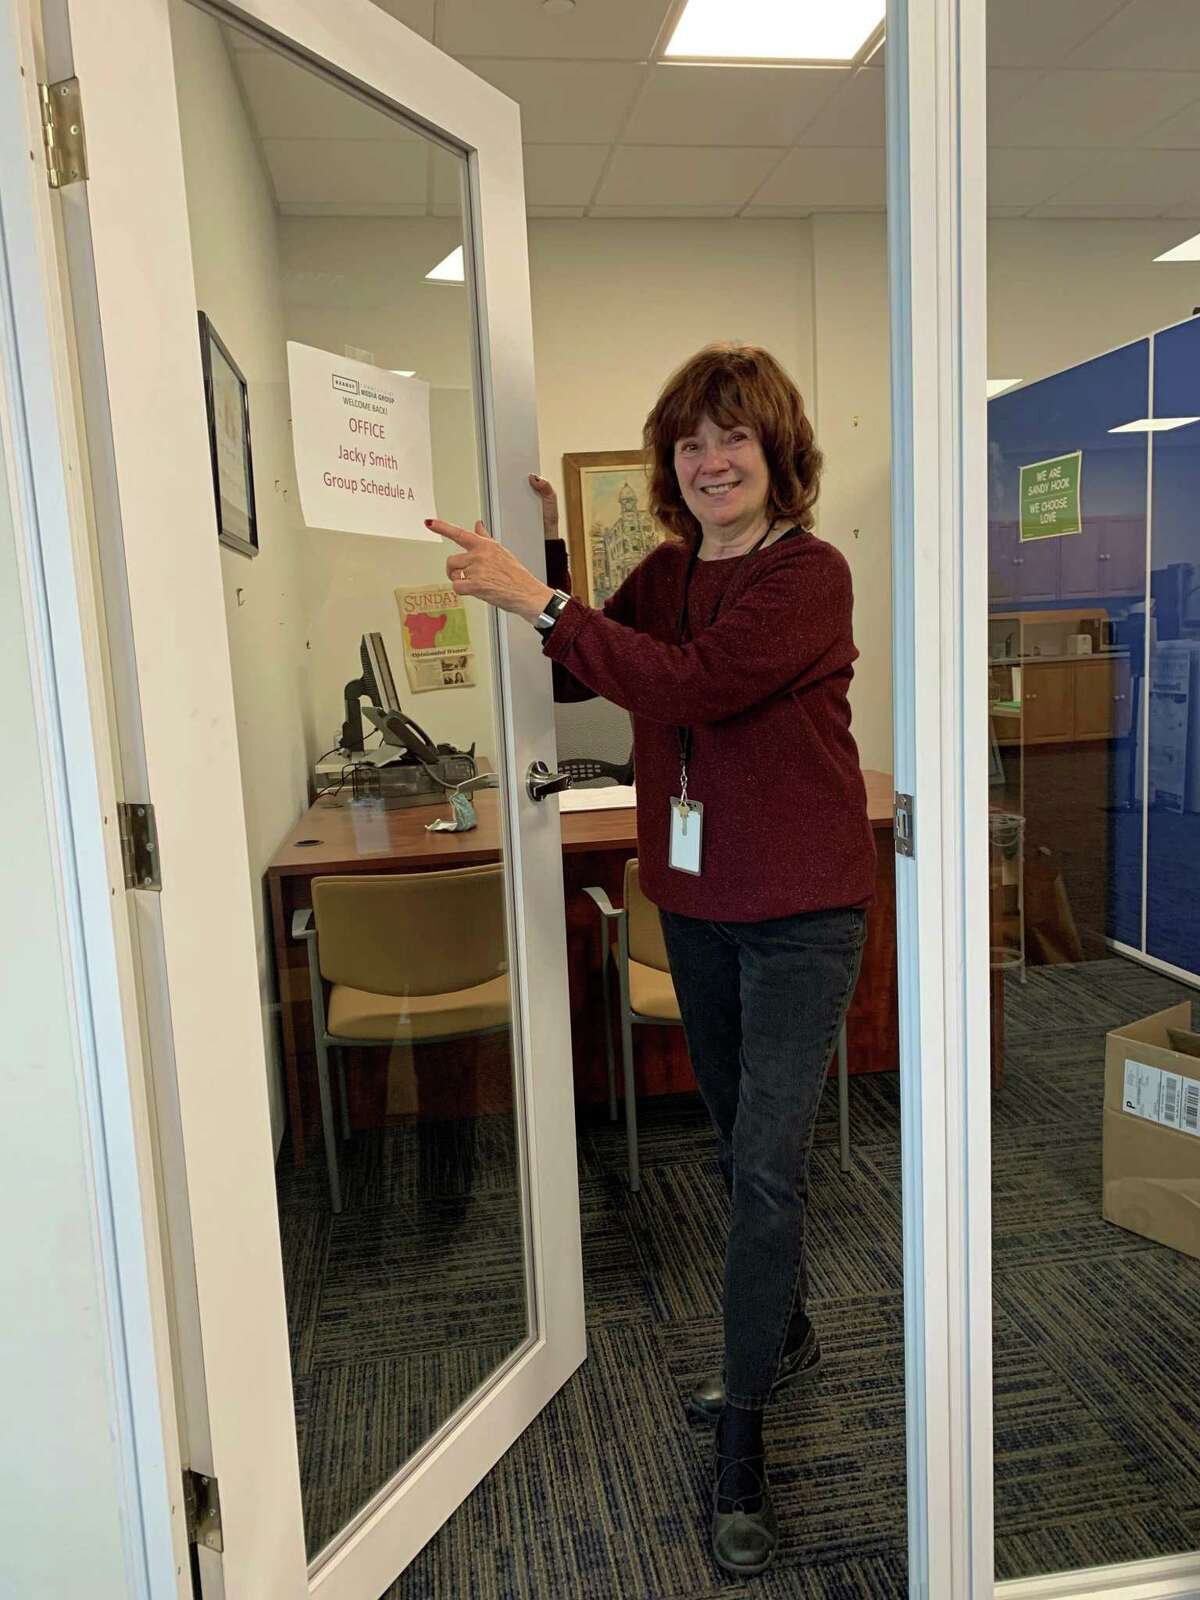 Columnist Jacqueline Smith points to the “welcome back” sign on her office door at The News-Times in Danbury. It was her first visit back since leaving in mid-March to work from home because of the pandemic. The newsroom, like many other businesses, will remain closed for the foreseeable future.